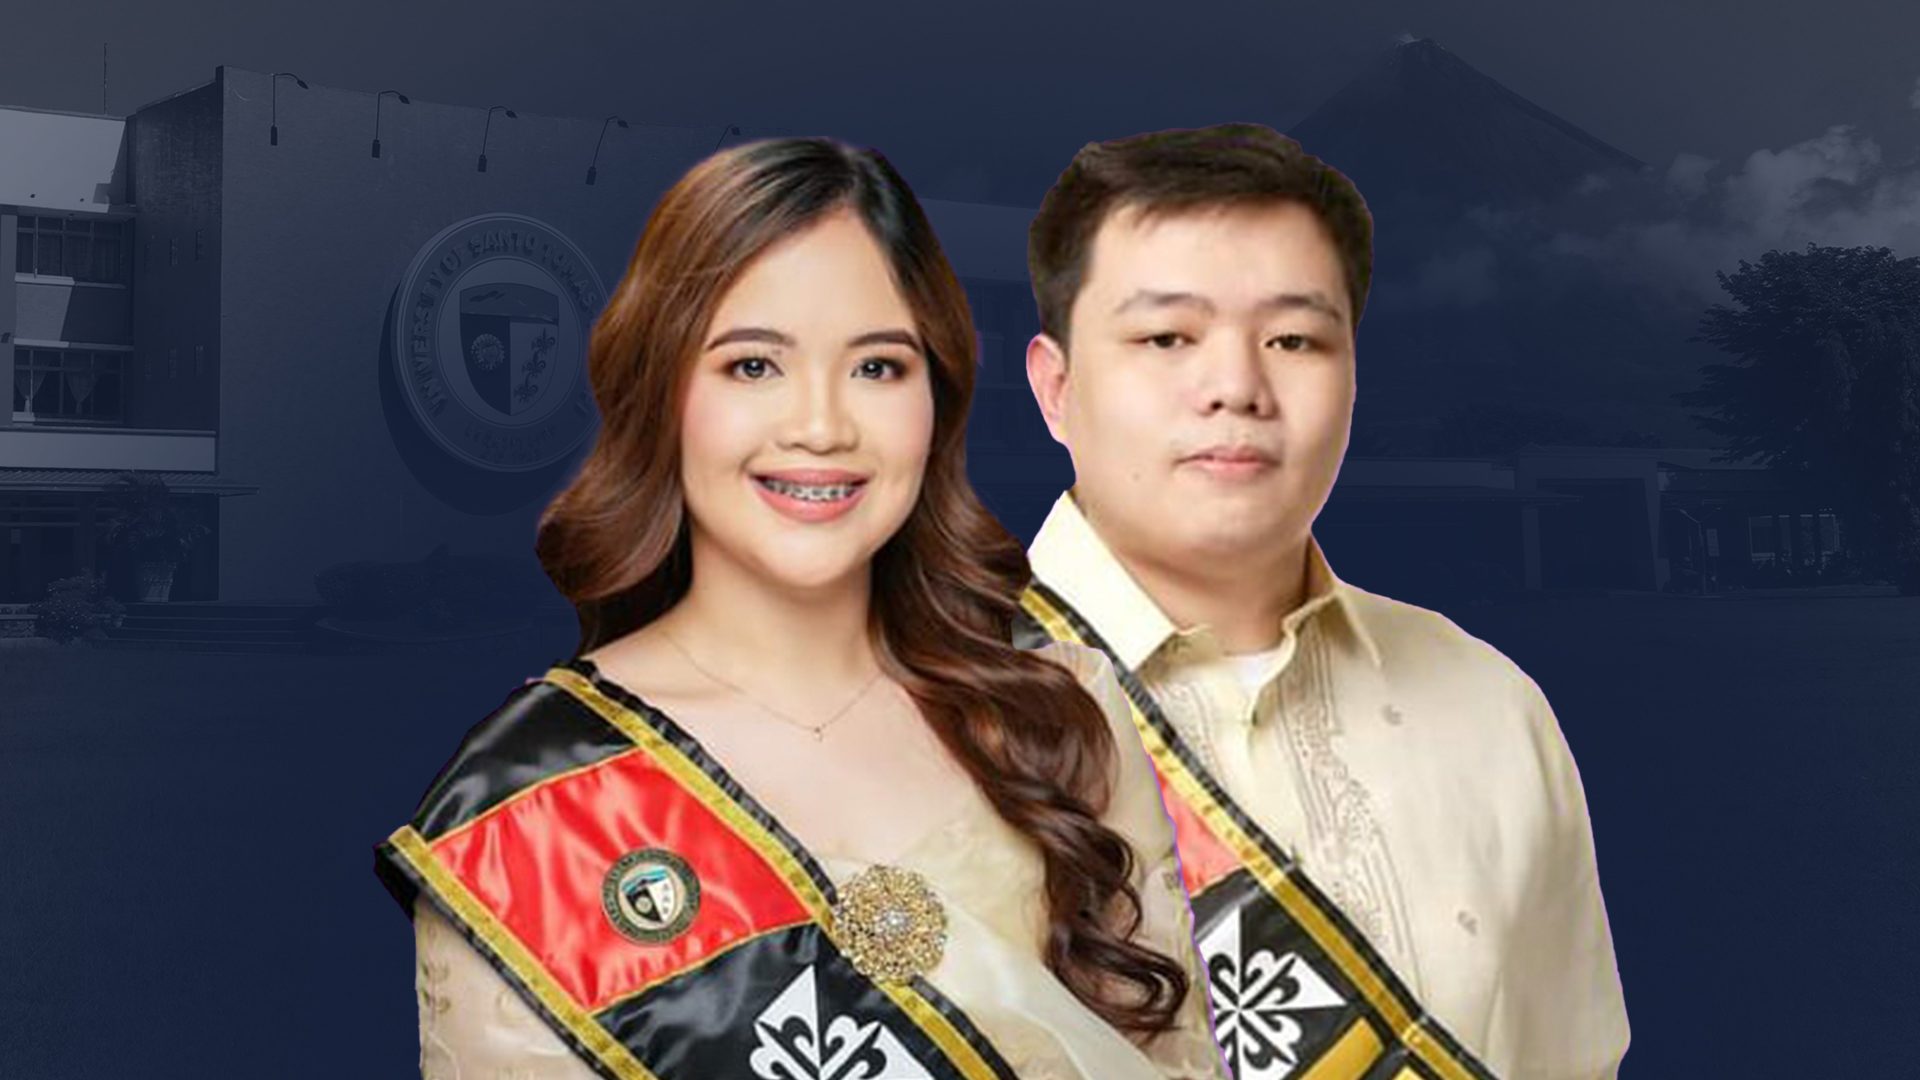 UST-Legazpi shines in 2023 Bar exams with 2 on top passers’ list